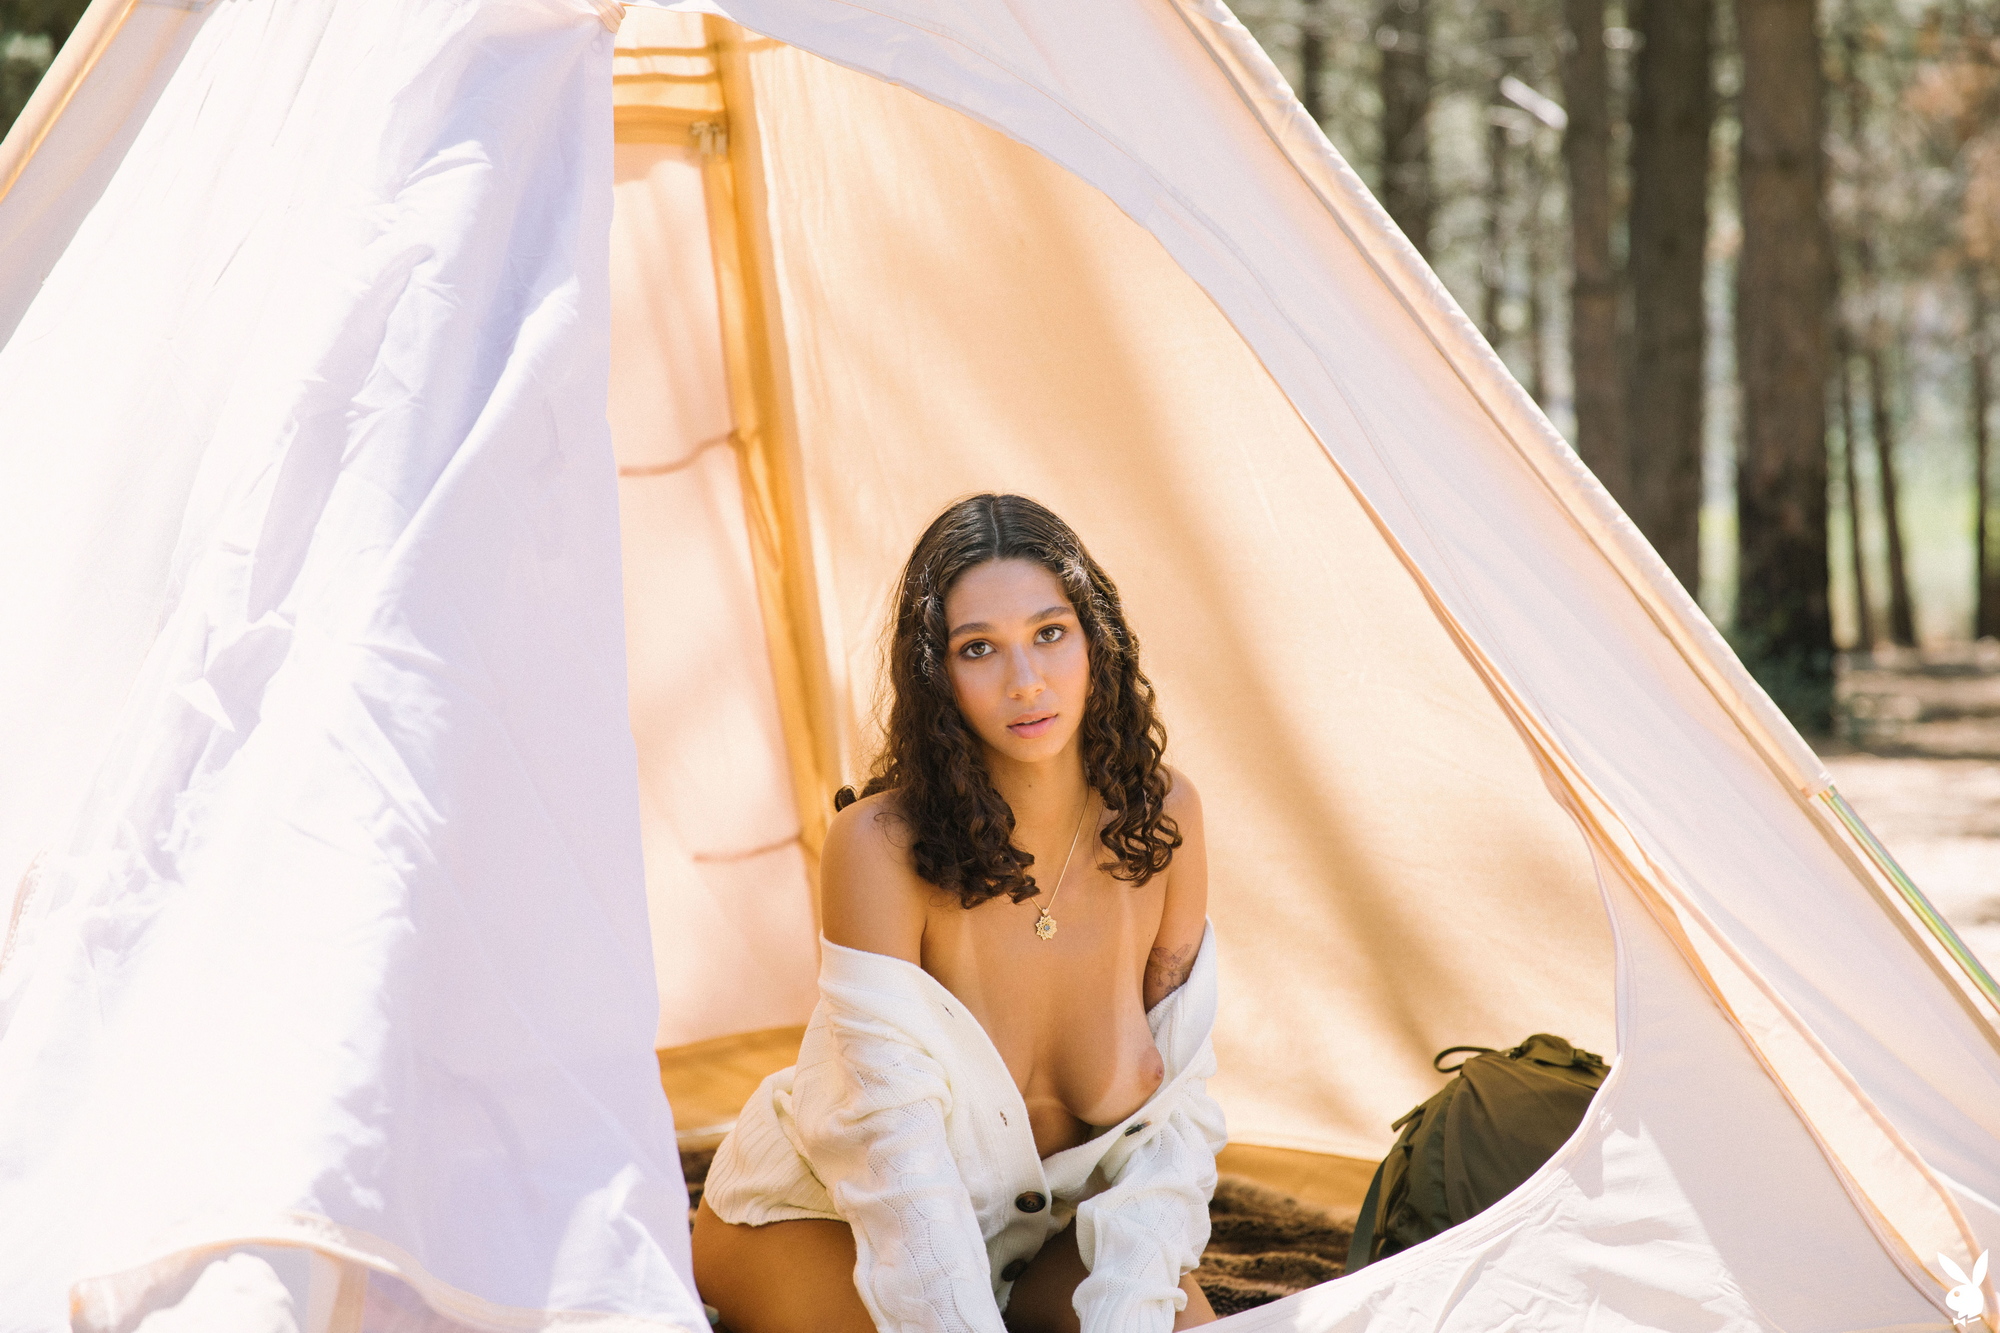 maia-serena-tranquil-setting-naked-brunette-tent-woods-playboy-11